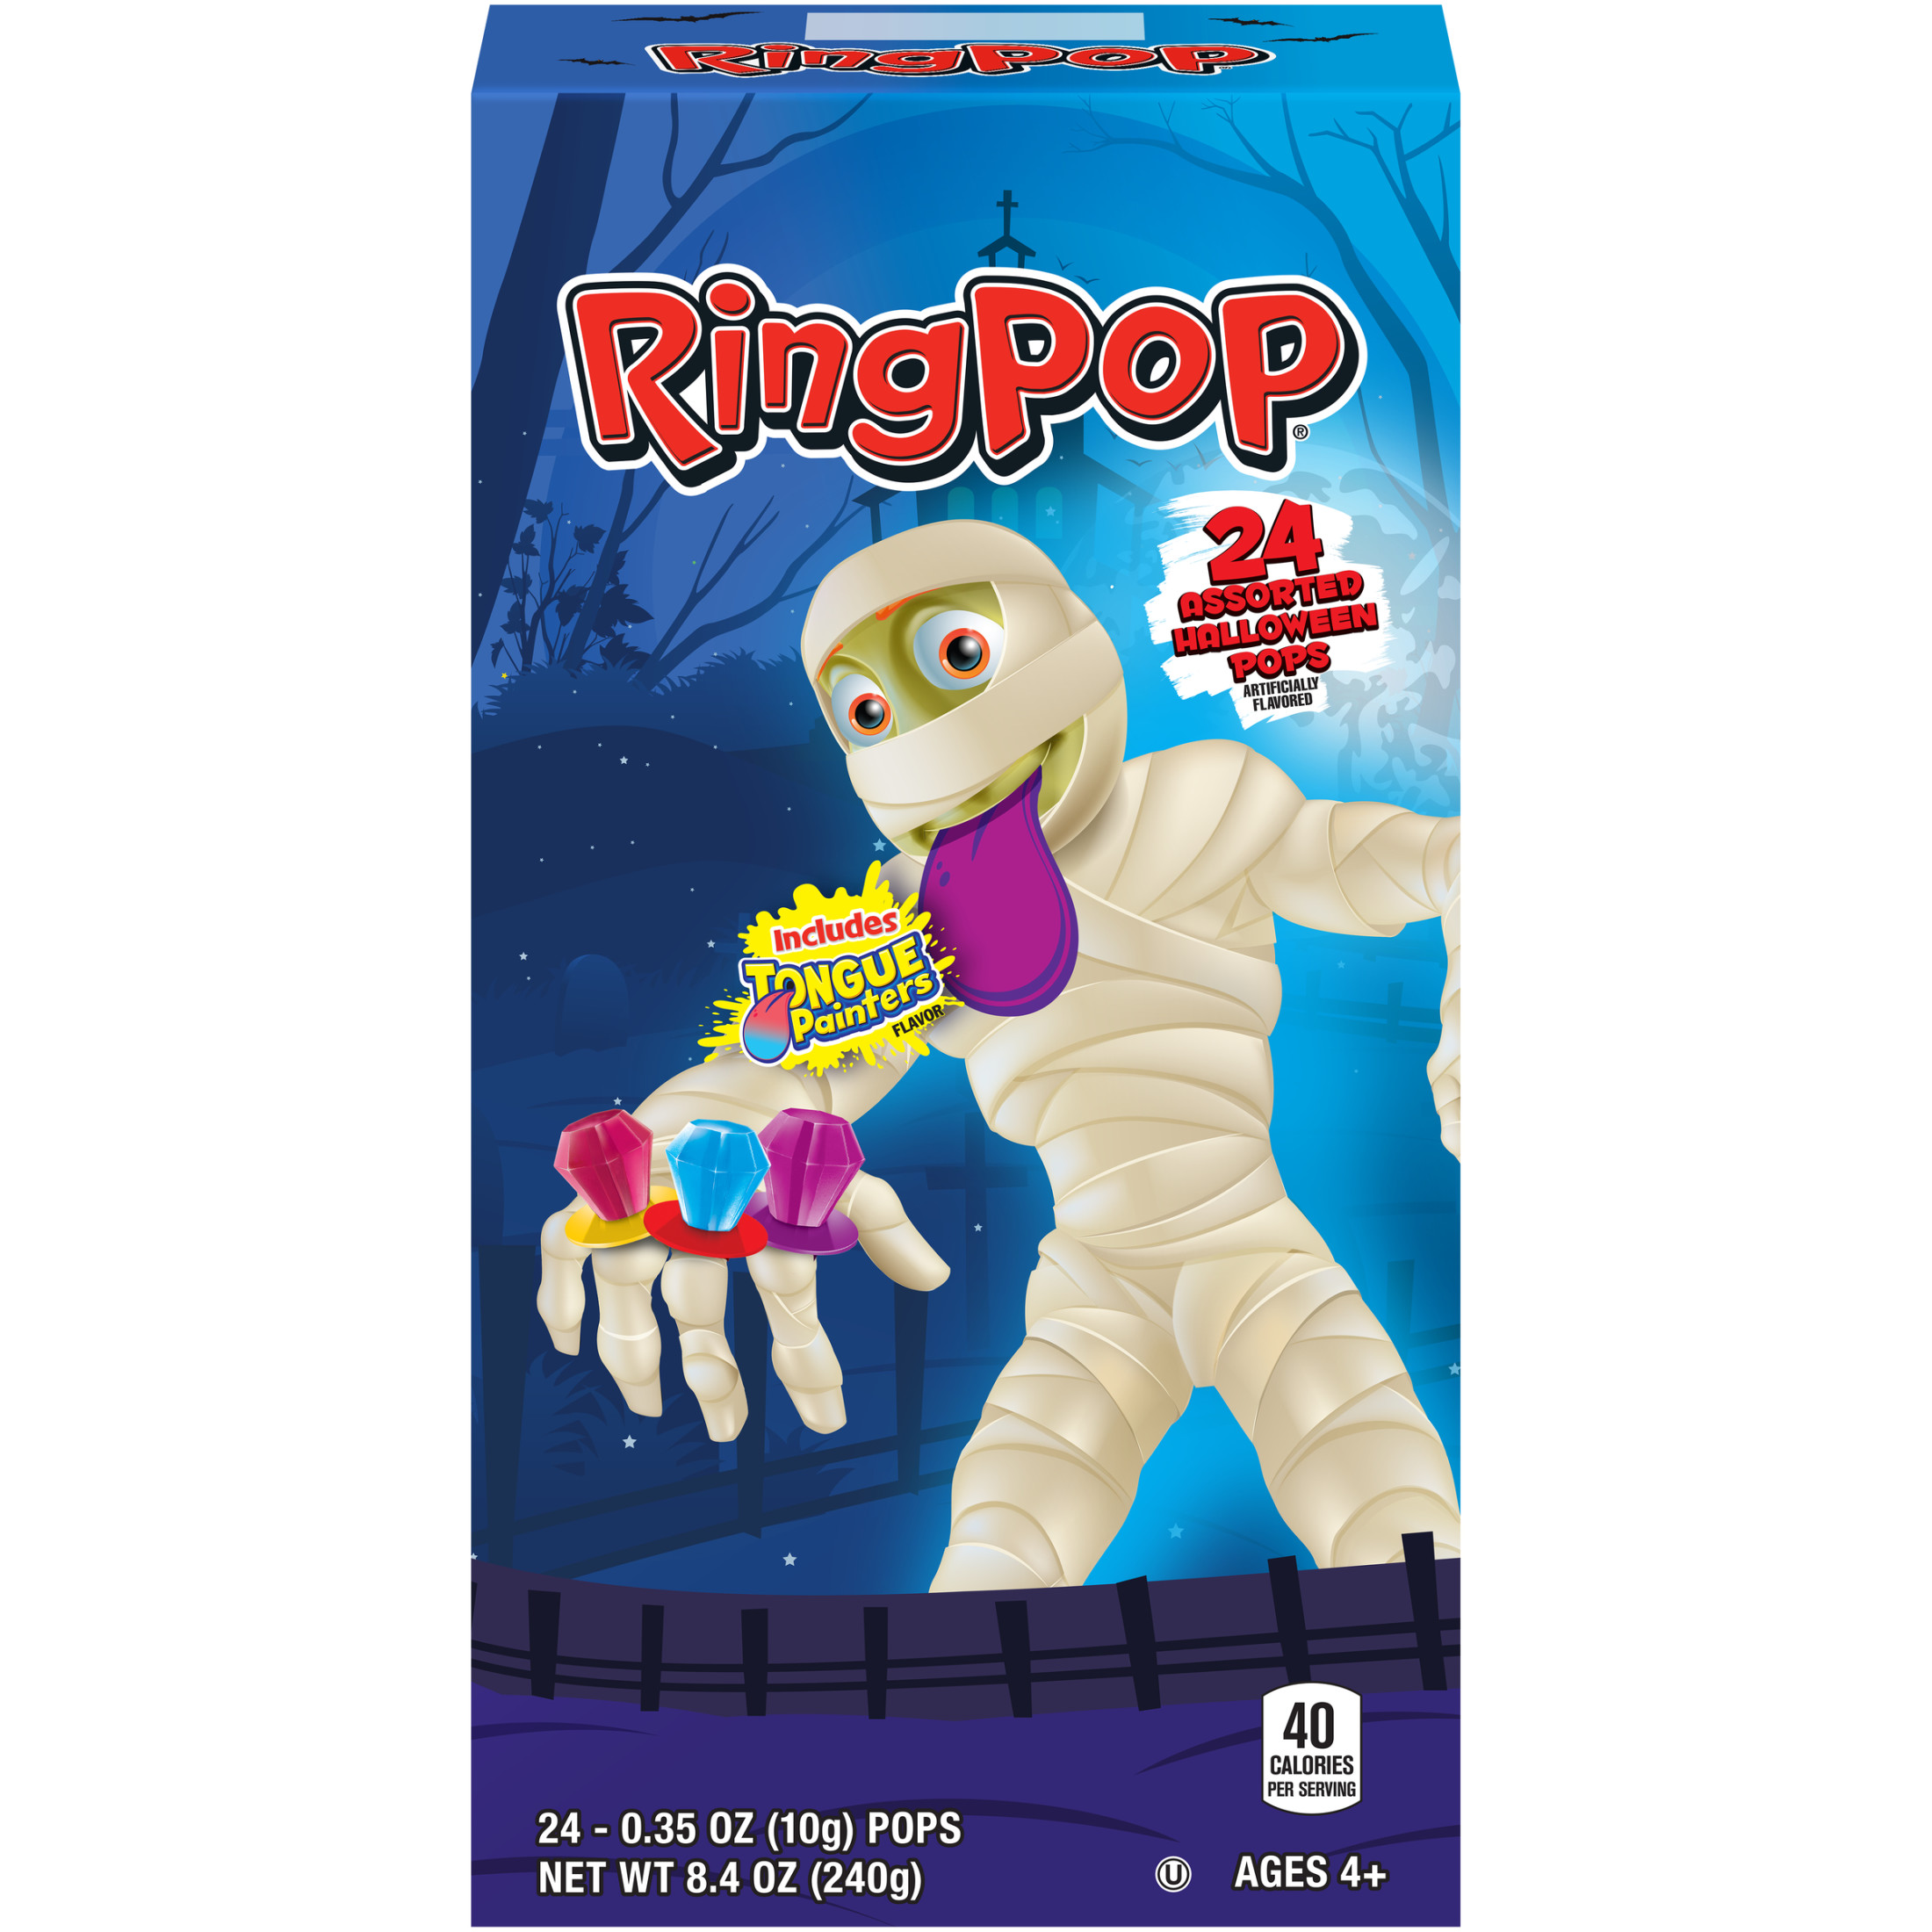 Ring Pop Halloween Variety Box, Assorted Flavor Lollipops, 8.4 oz, 24 Count Box - image 1 of 6